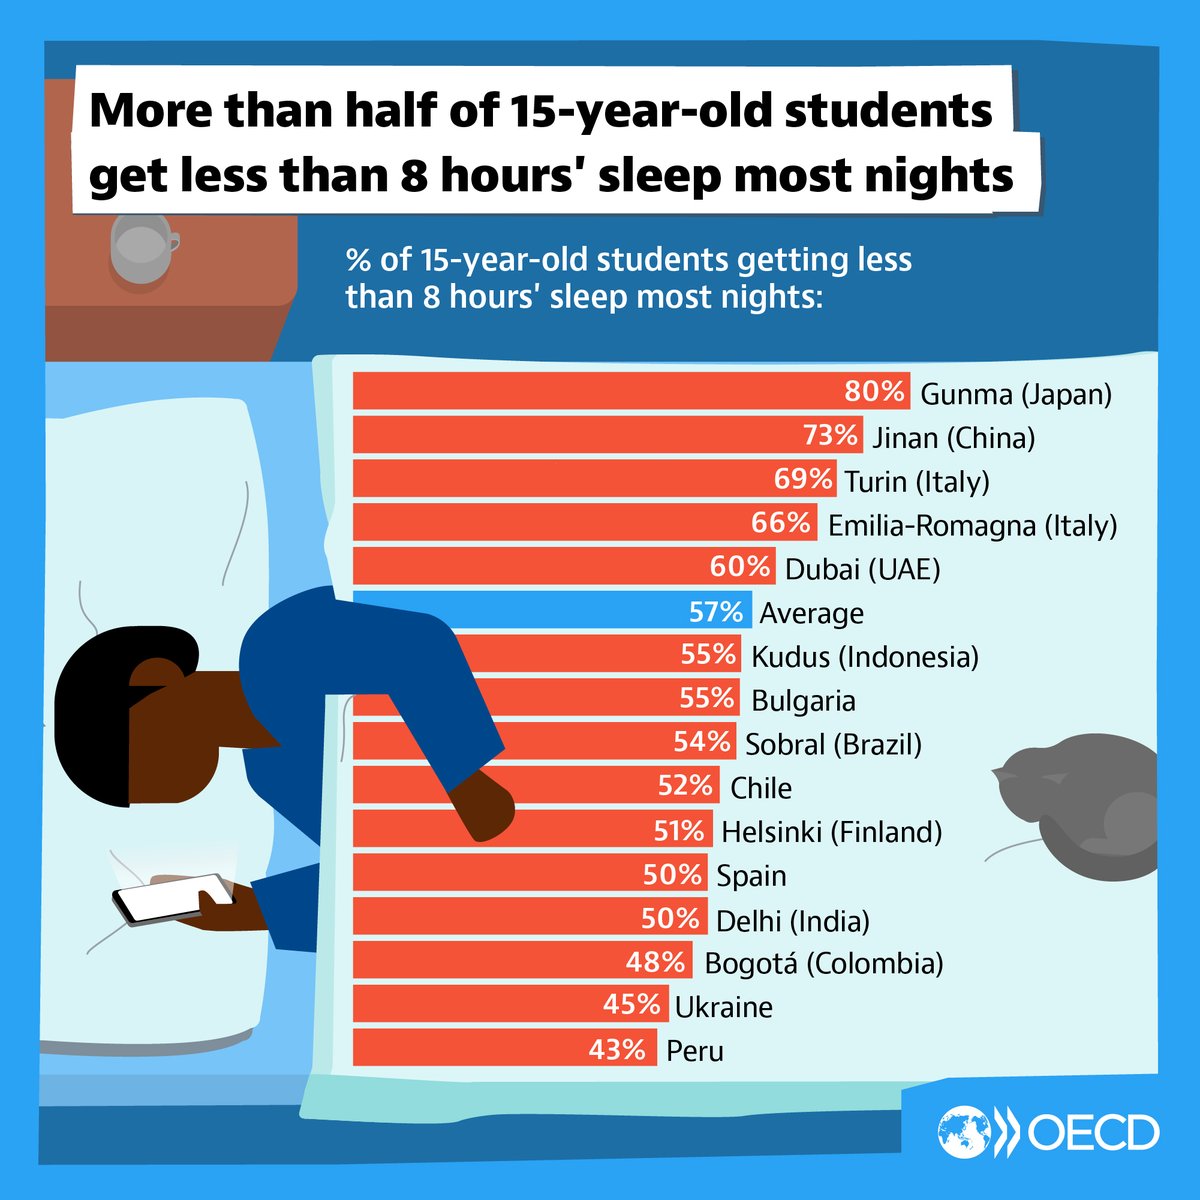 How much does sleep matter? A new OECD study finds students who get more sleep are healthier and more satisfied with their lives. Yet, across the OECD, less than half of students are getting enough sleep. Read more in the OECD survey 👉oe.cd/il/5wl